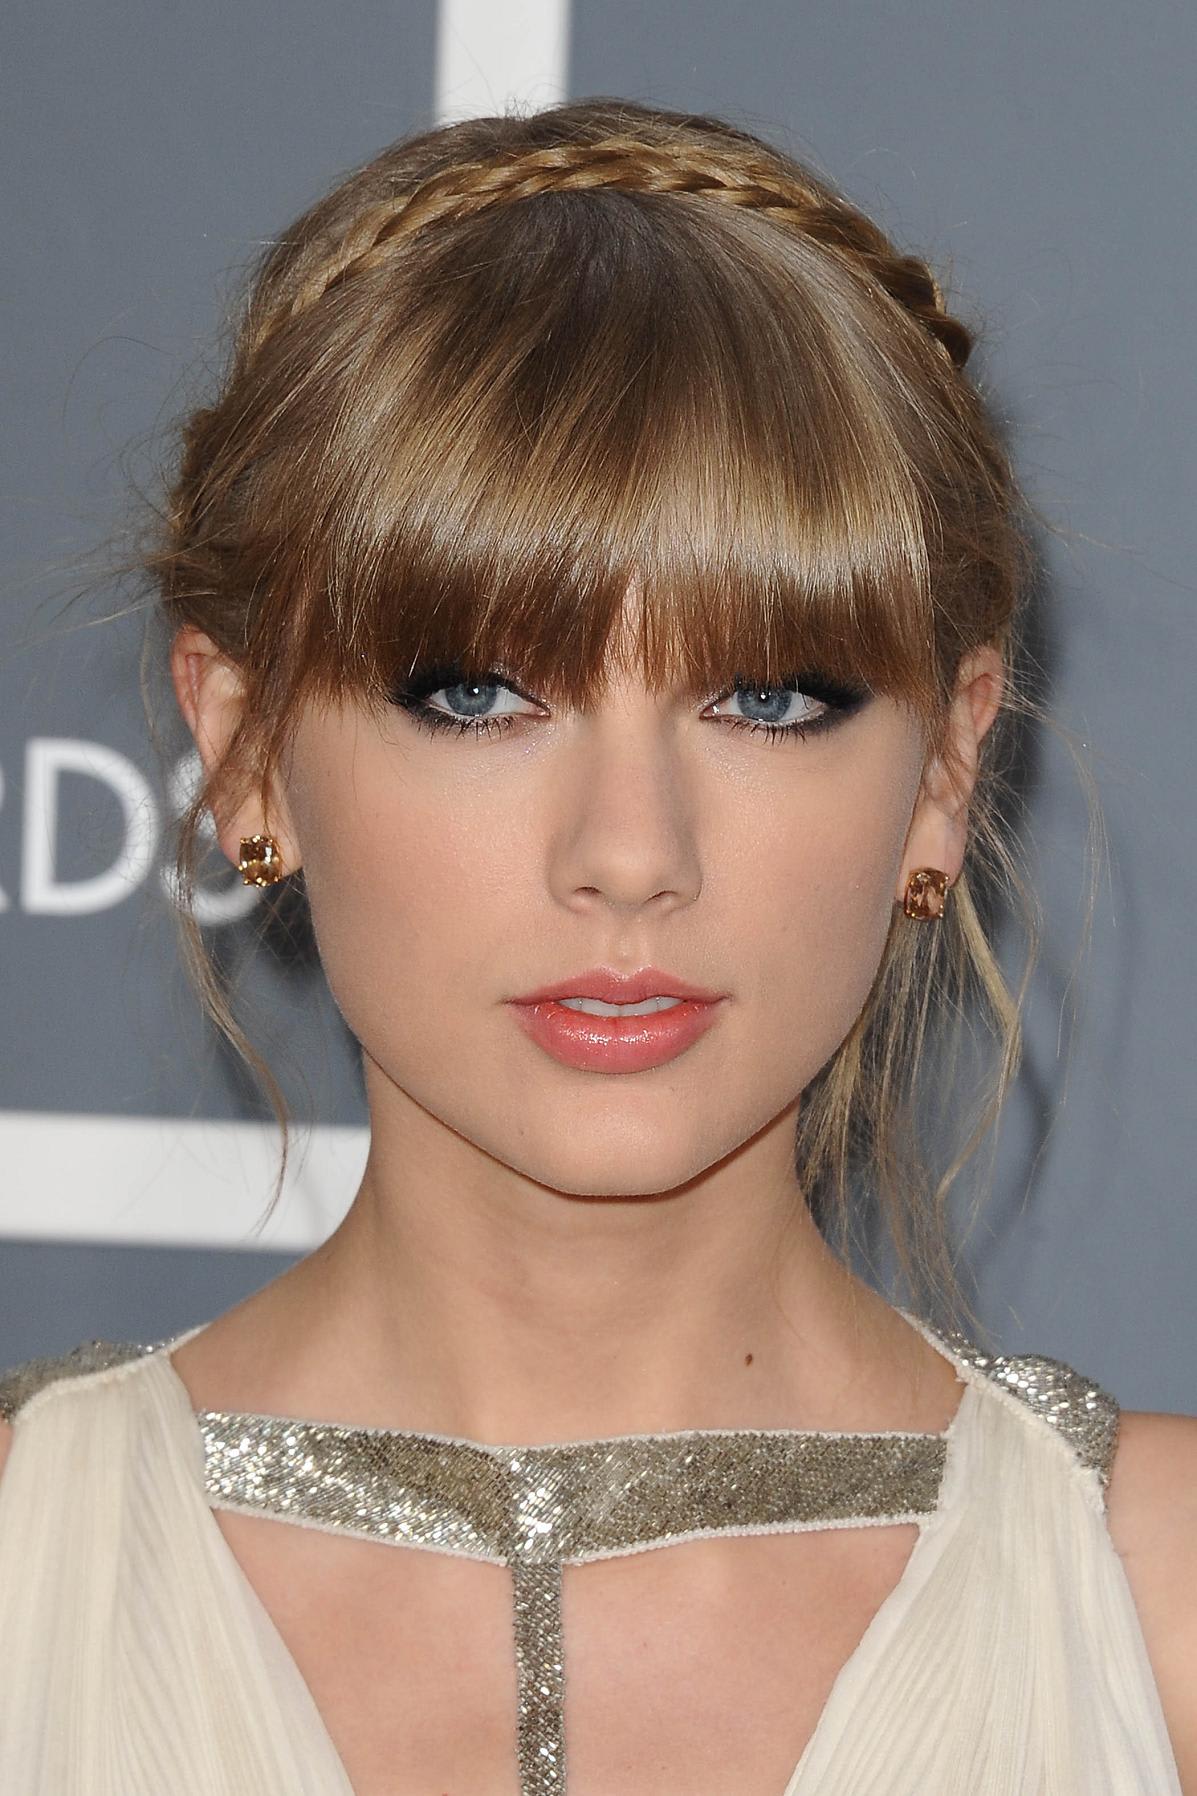 Taylor Swift - The 55th Annual GRAMMY Awards 10 Feb 2013 - ☆Favorite Celebrity ...1197 x 1796